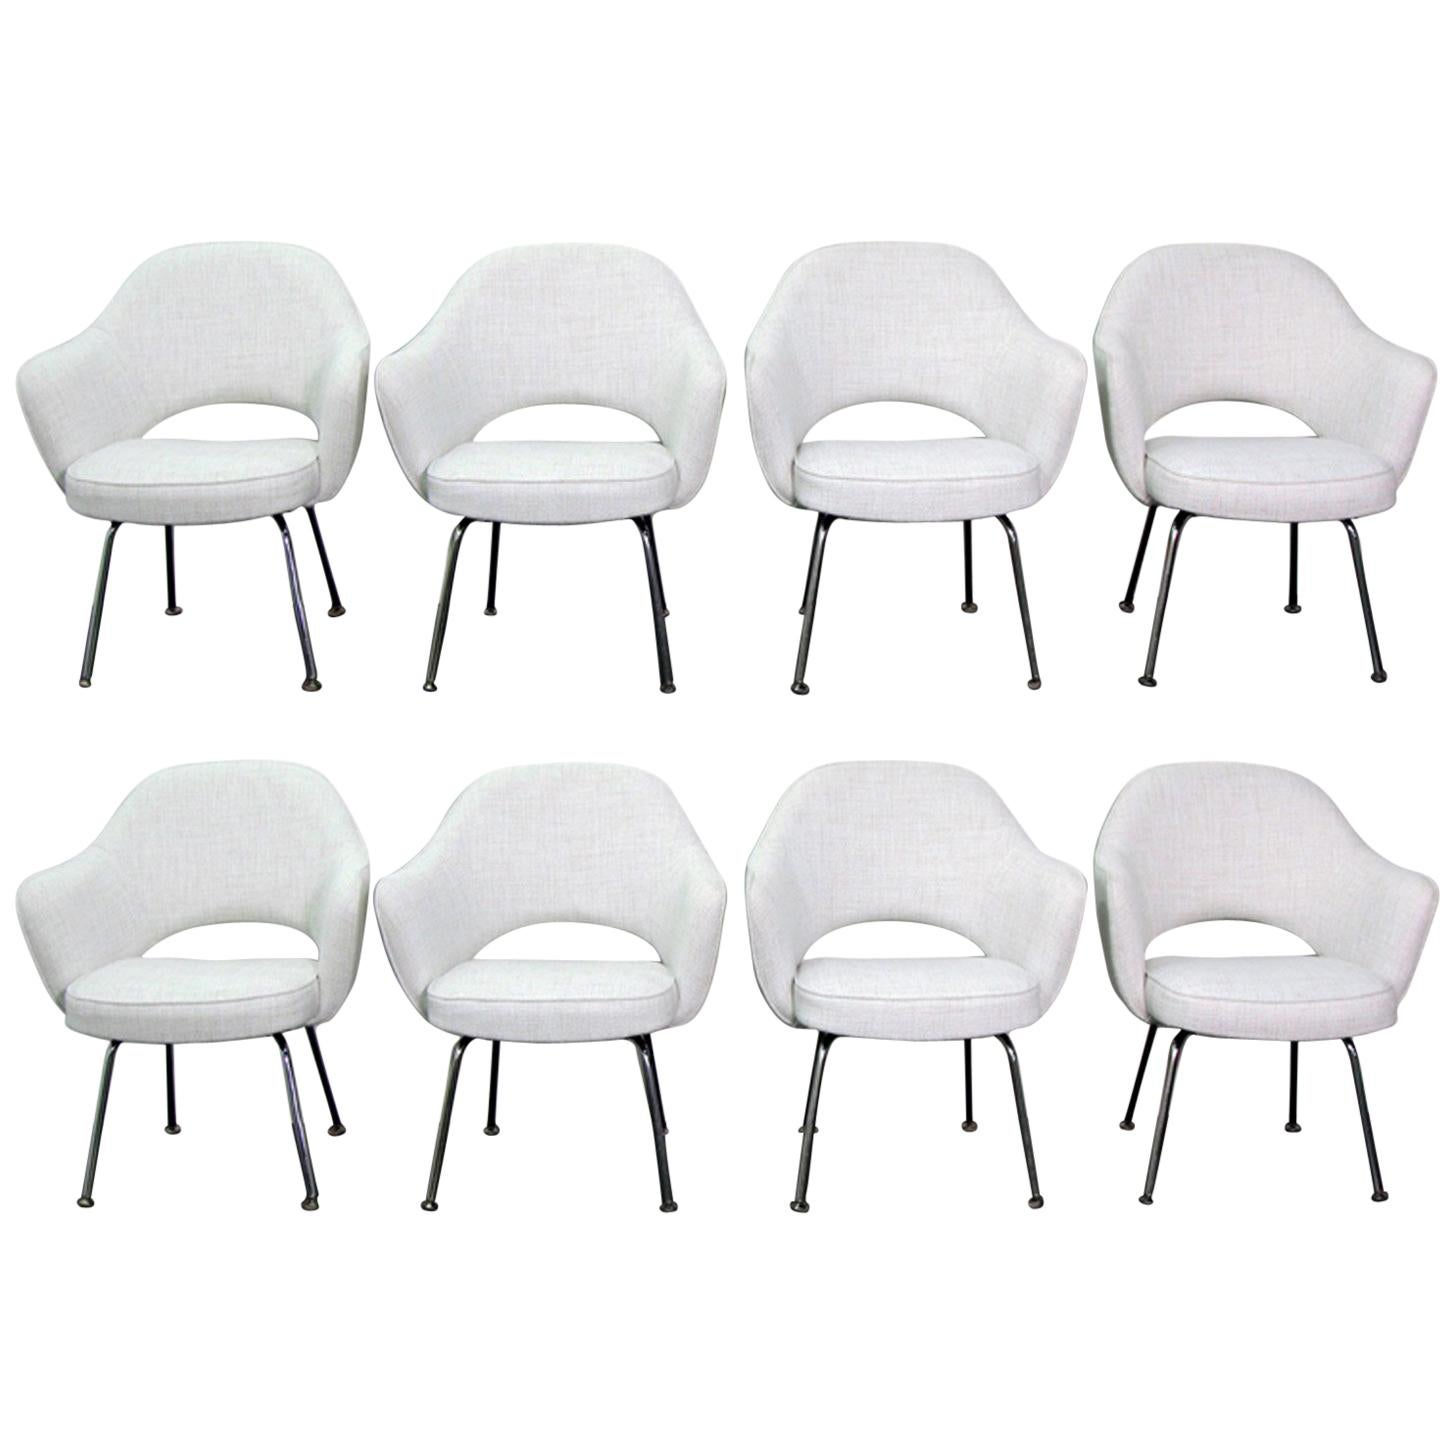 Set of 8 Newly Upholstered Saarinen Executive Chairs by Knoll